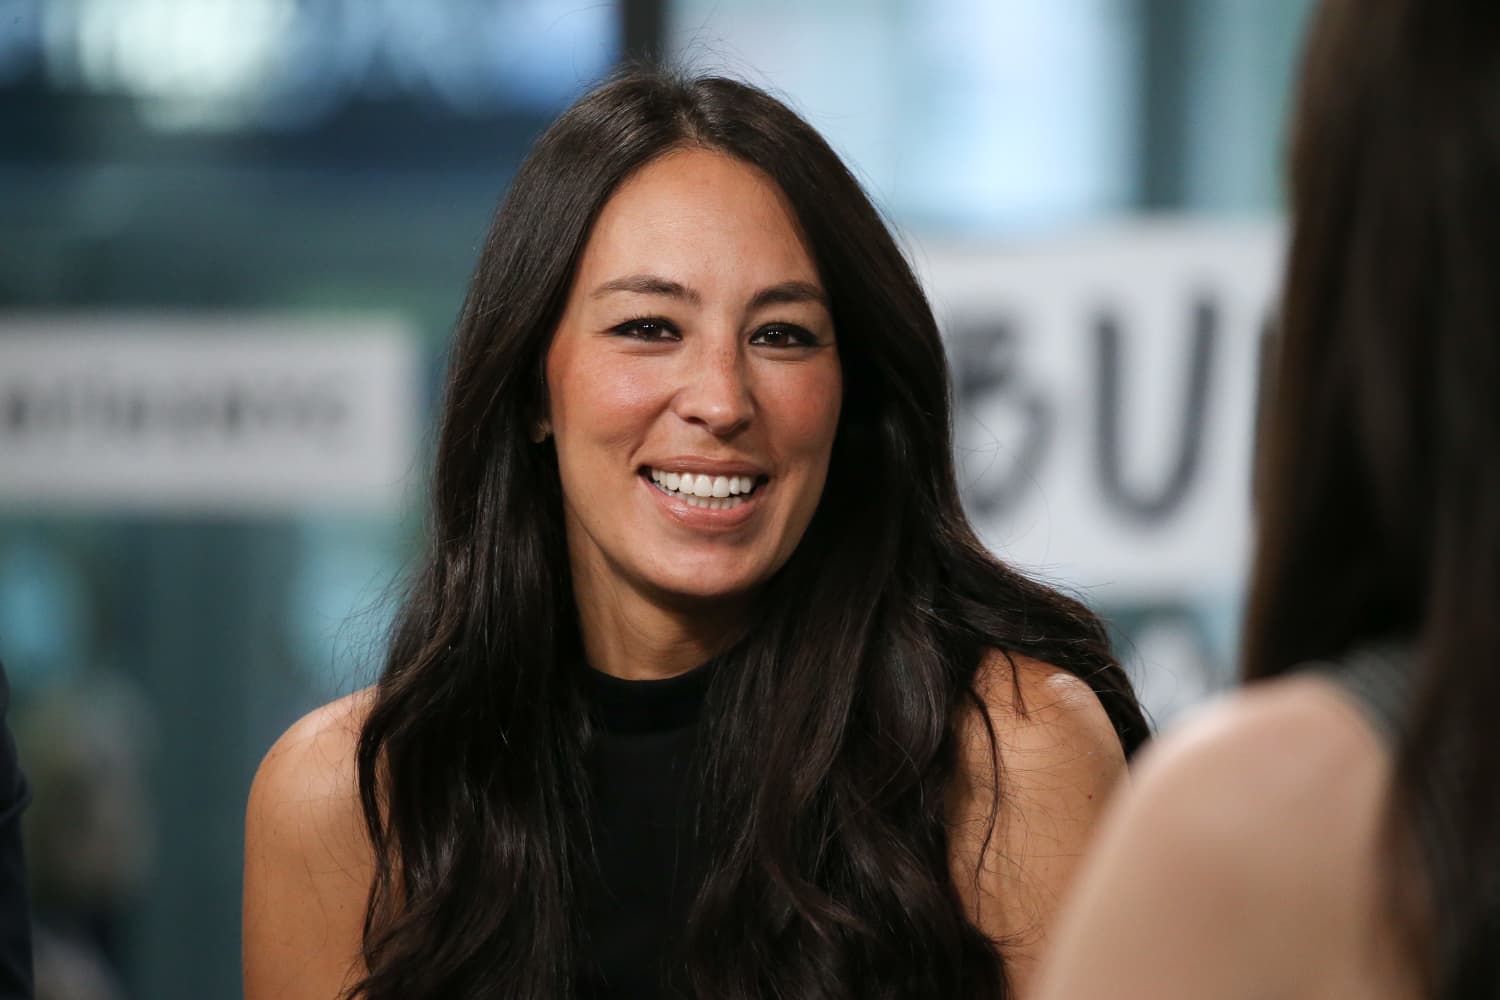 How Joanna Gaines Is Trying to Have More Fun This Summer